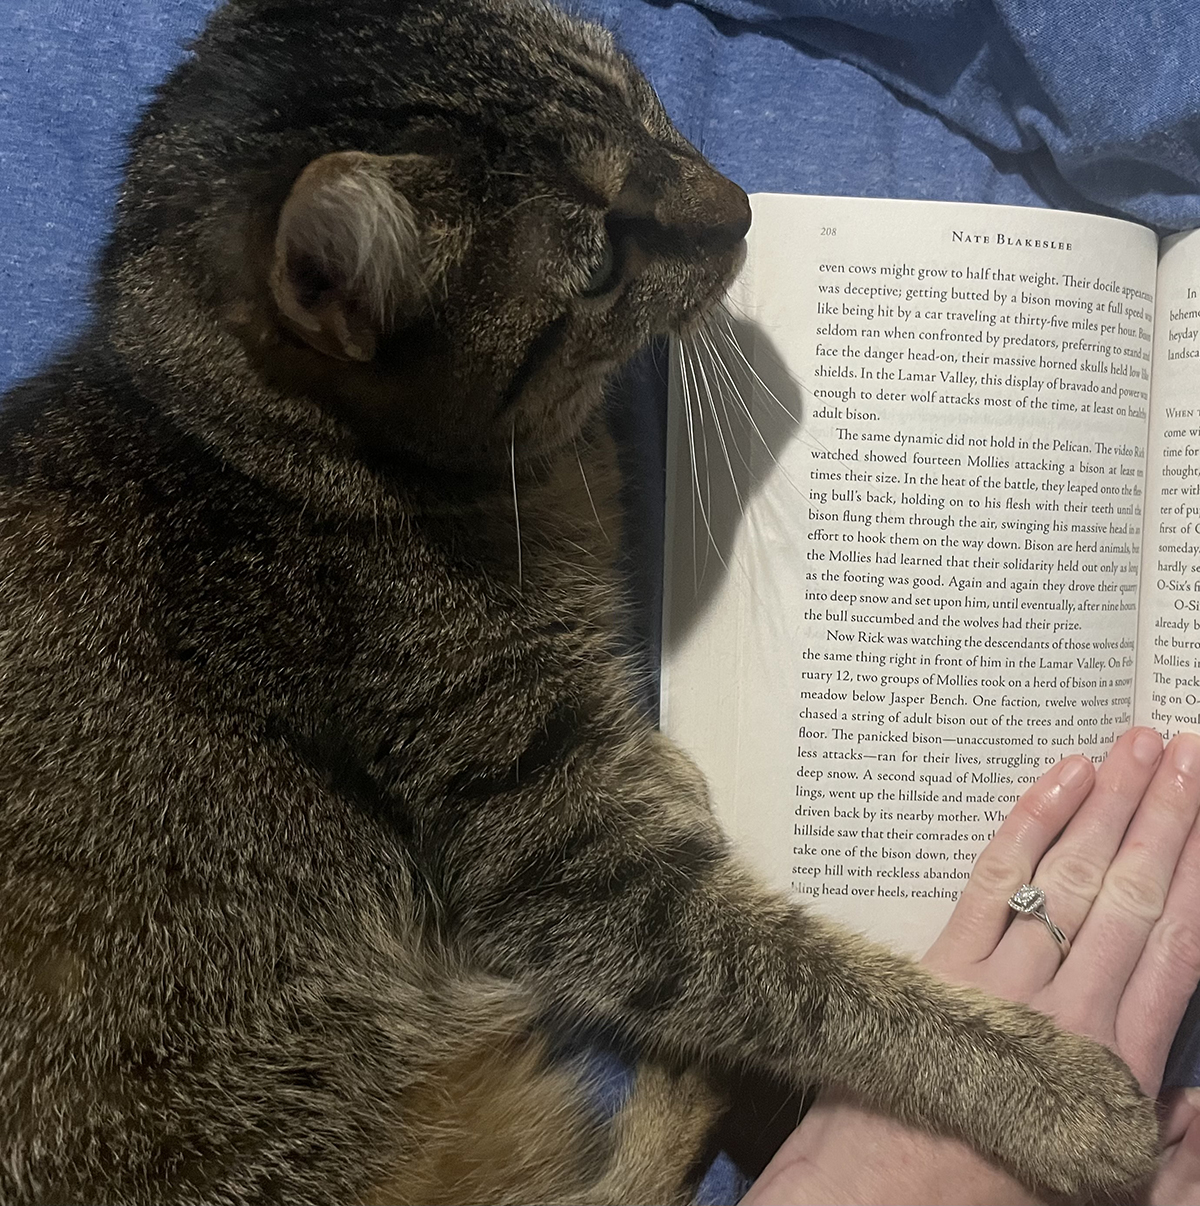 Johlynn and her kitty reading American Wolf together.